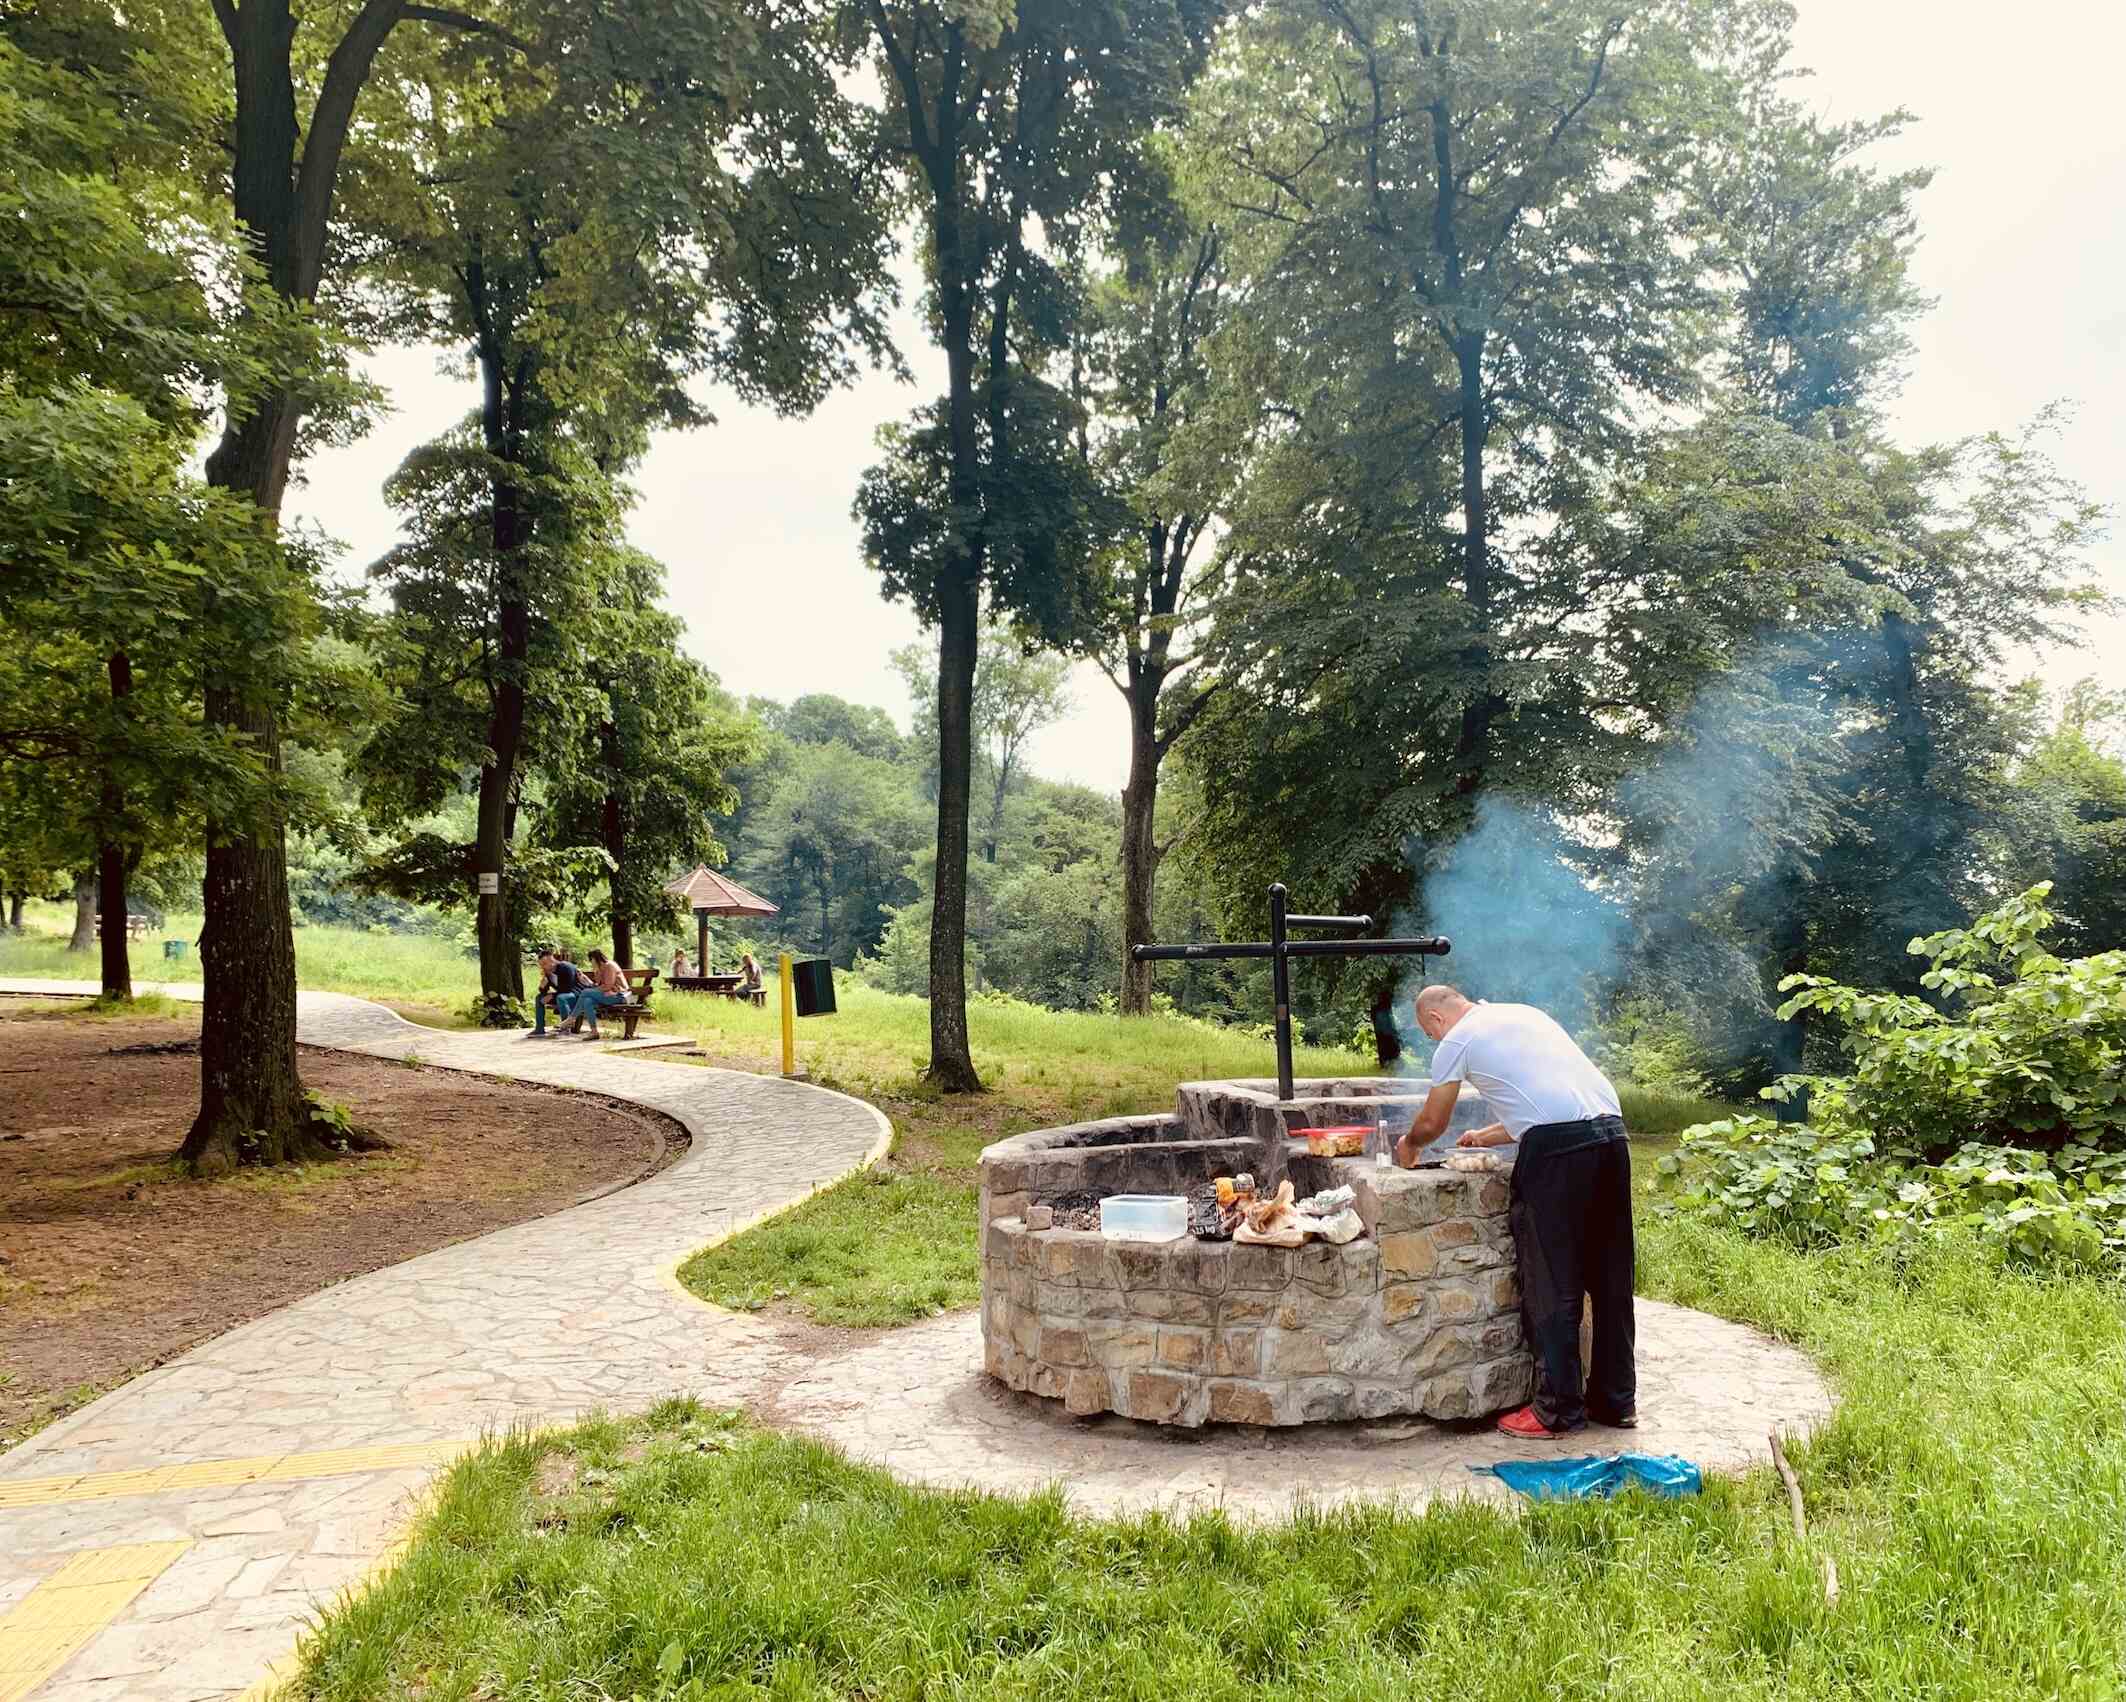 Barbecue time on Avala Mountain in Belgrade